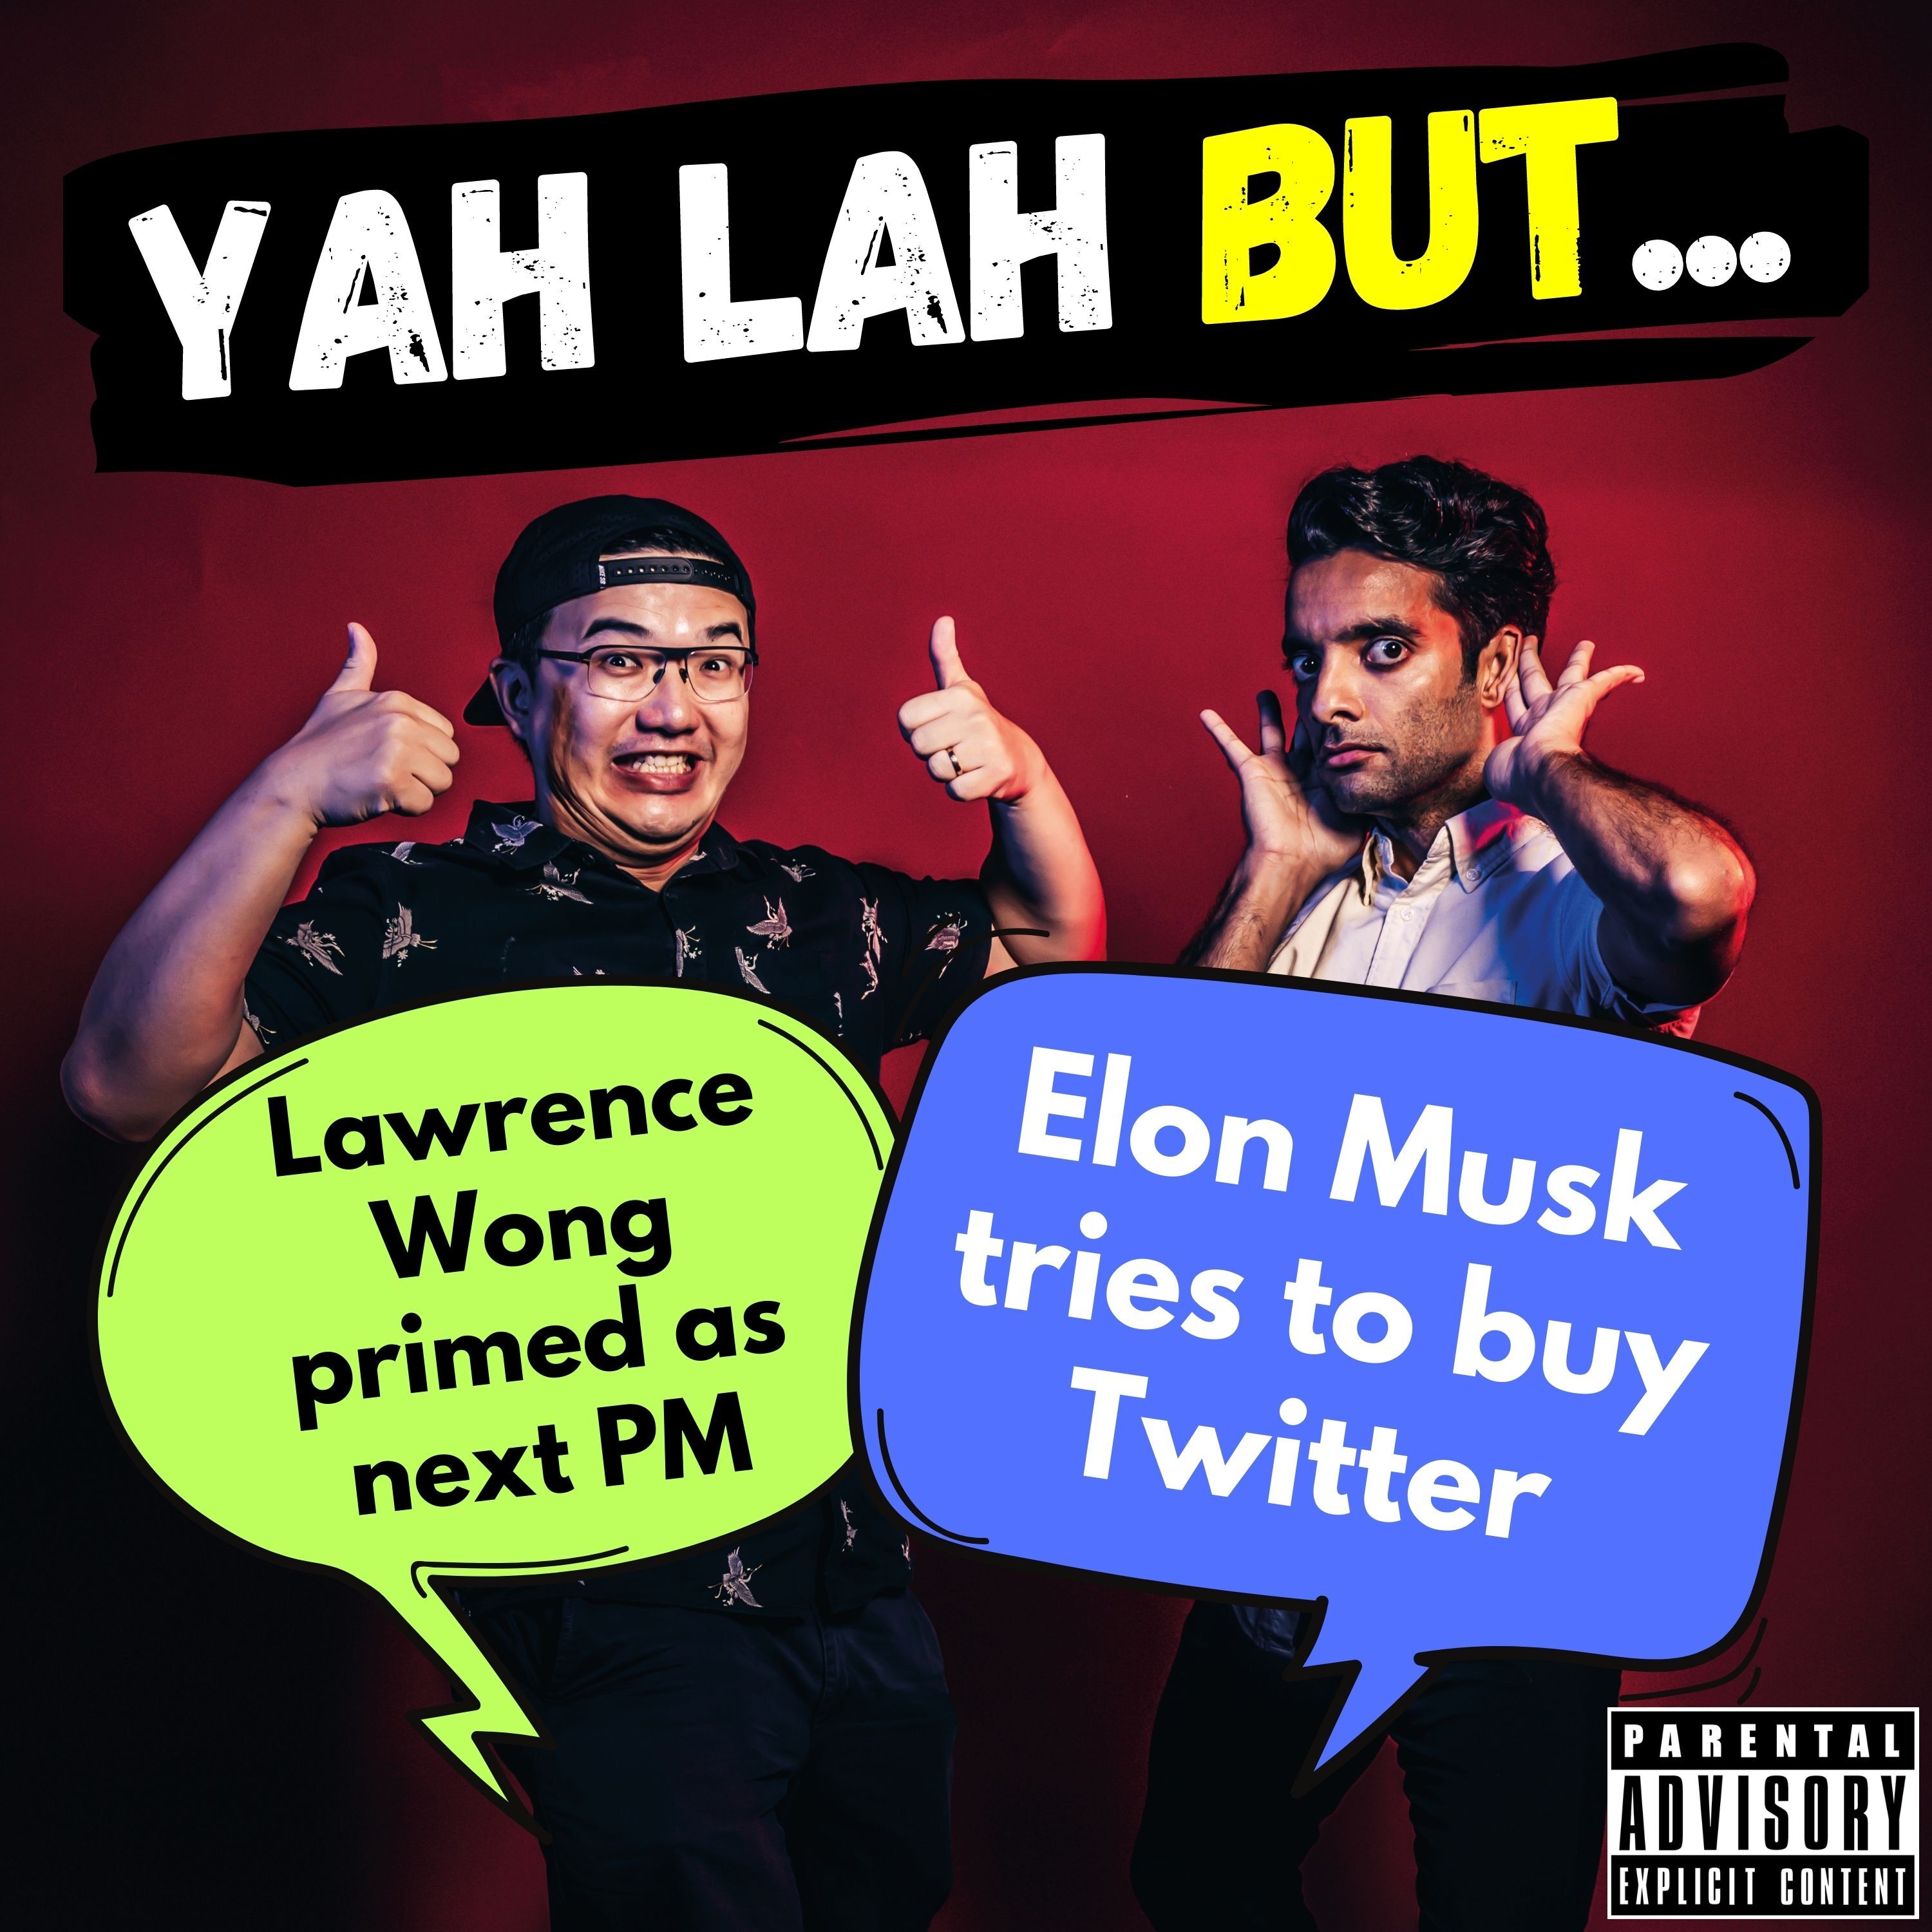 #284 - Lawrence Wong primed as next PM & Elon Musk tries to buy Twitter